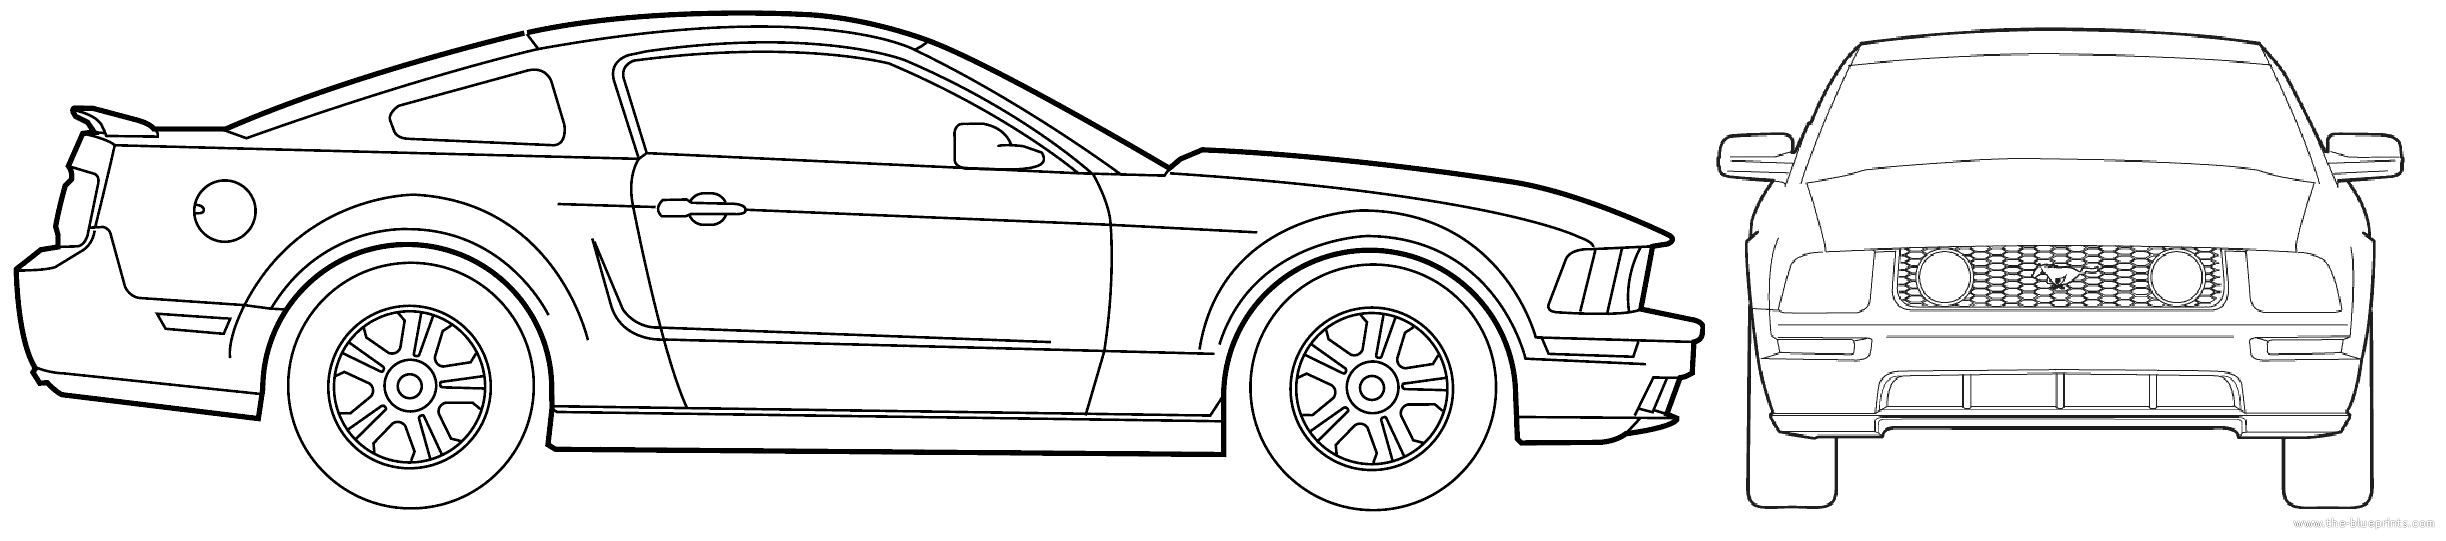 2007 Ford mustang blueprints #8